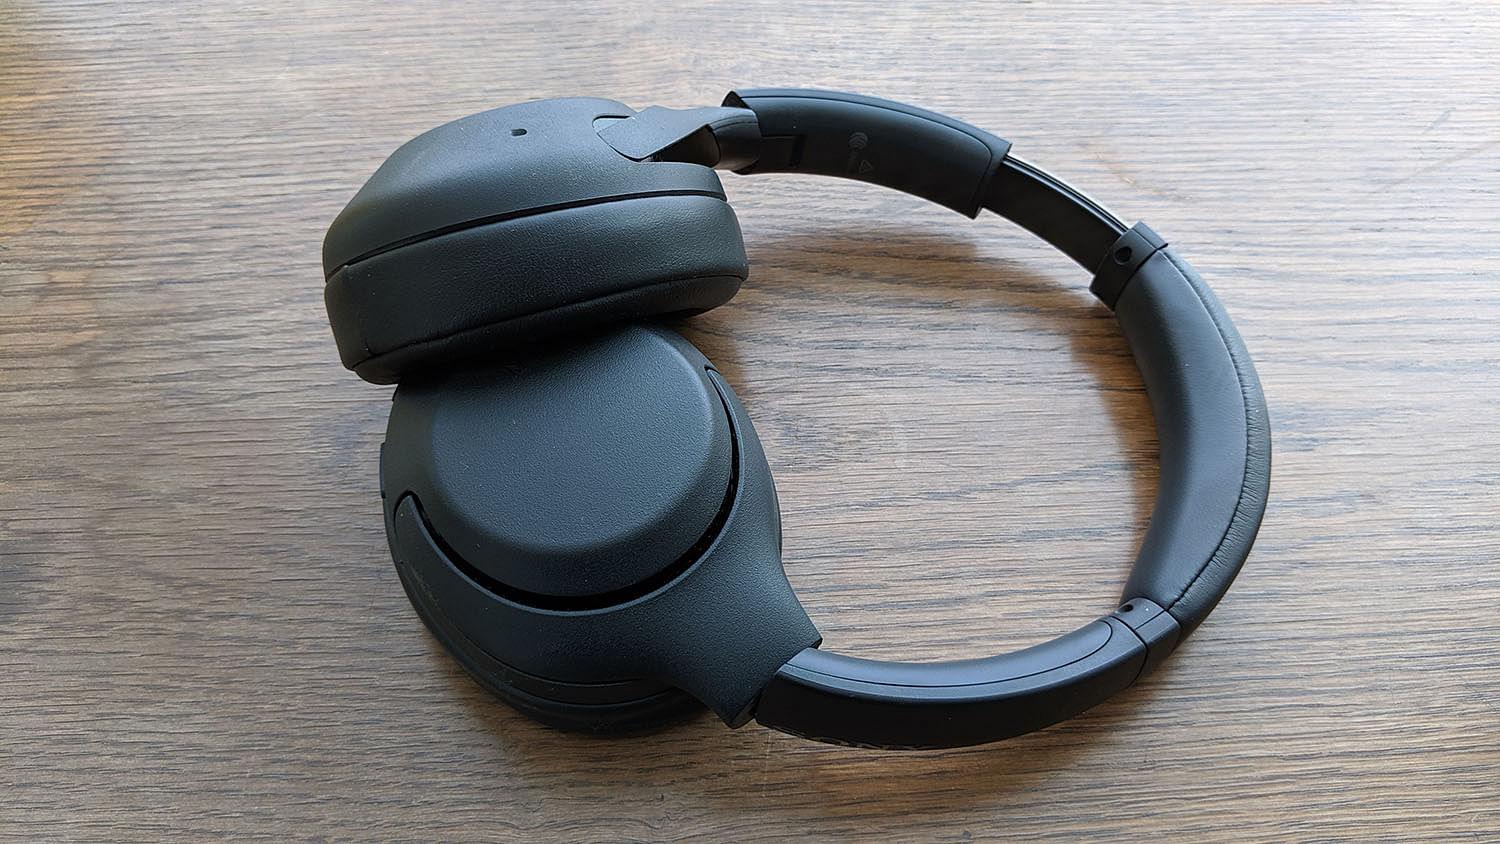 Bluetooth headphones have become popular over the past few years.